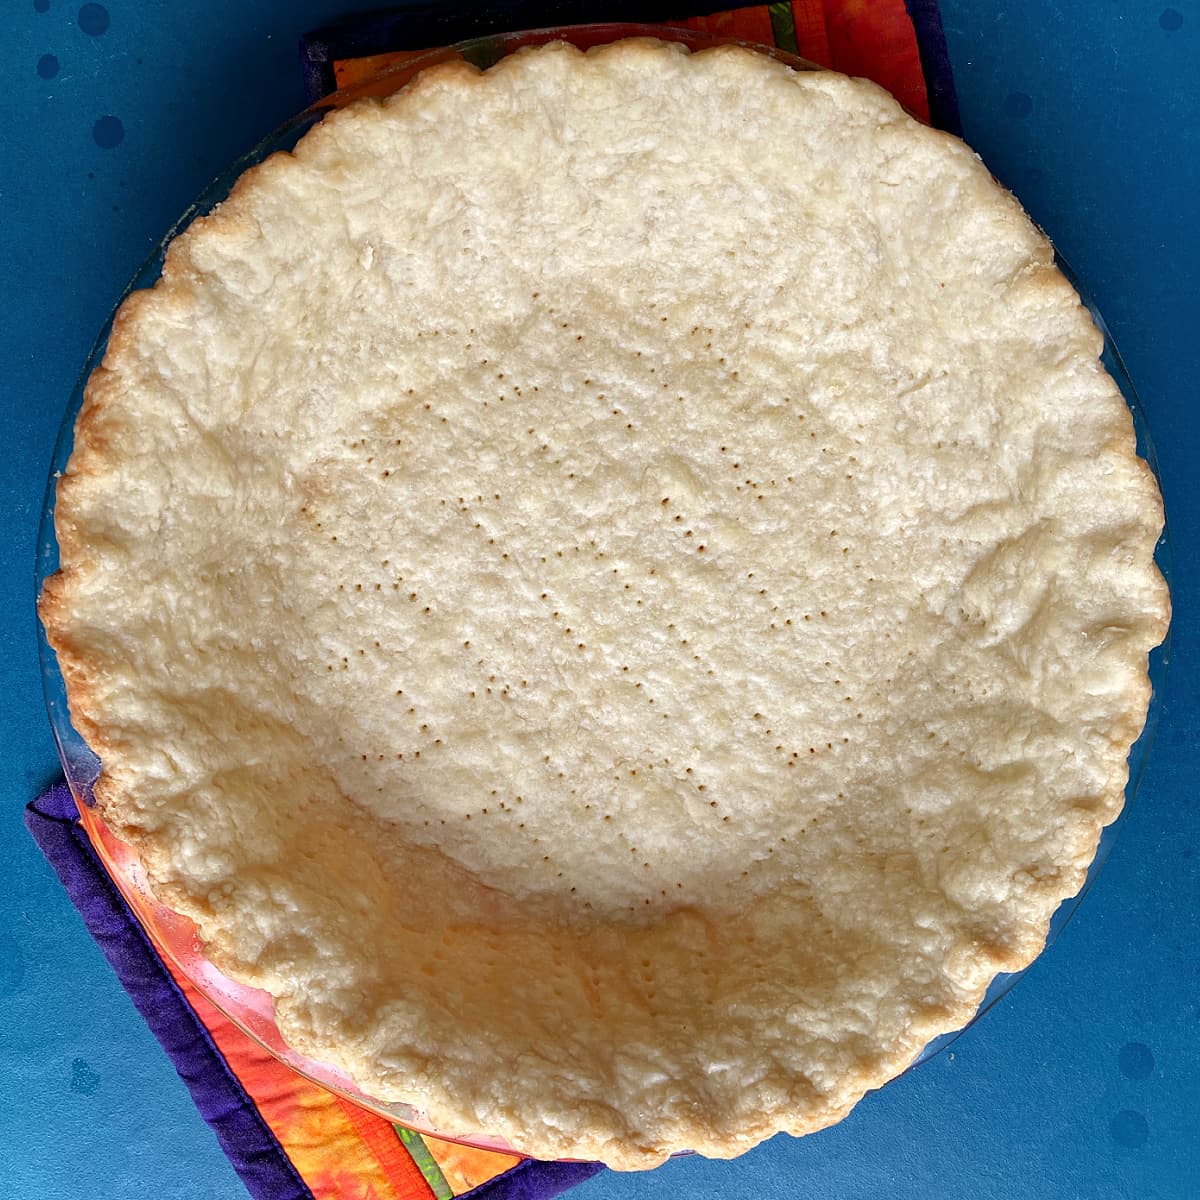 Blind baked pie shell, ready to fill.